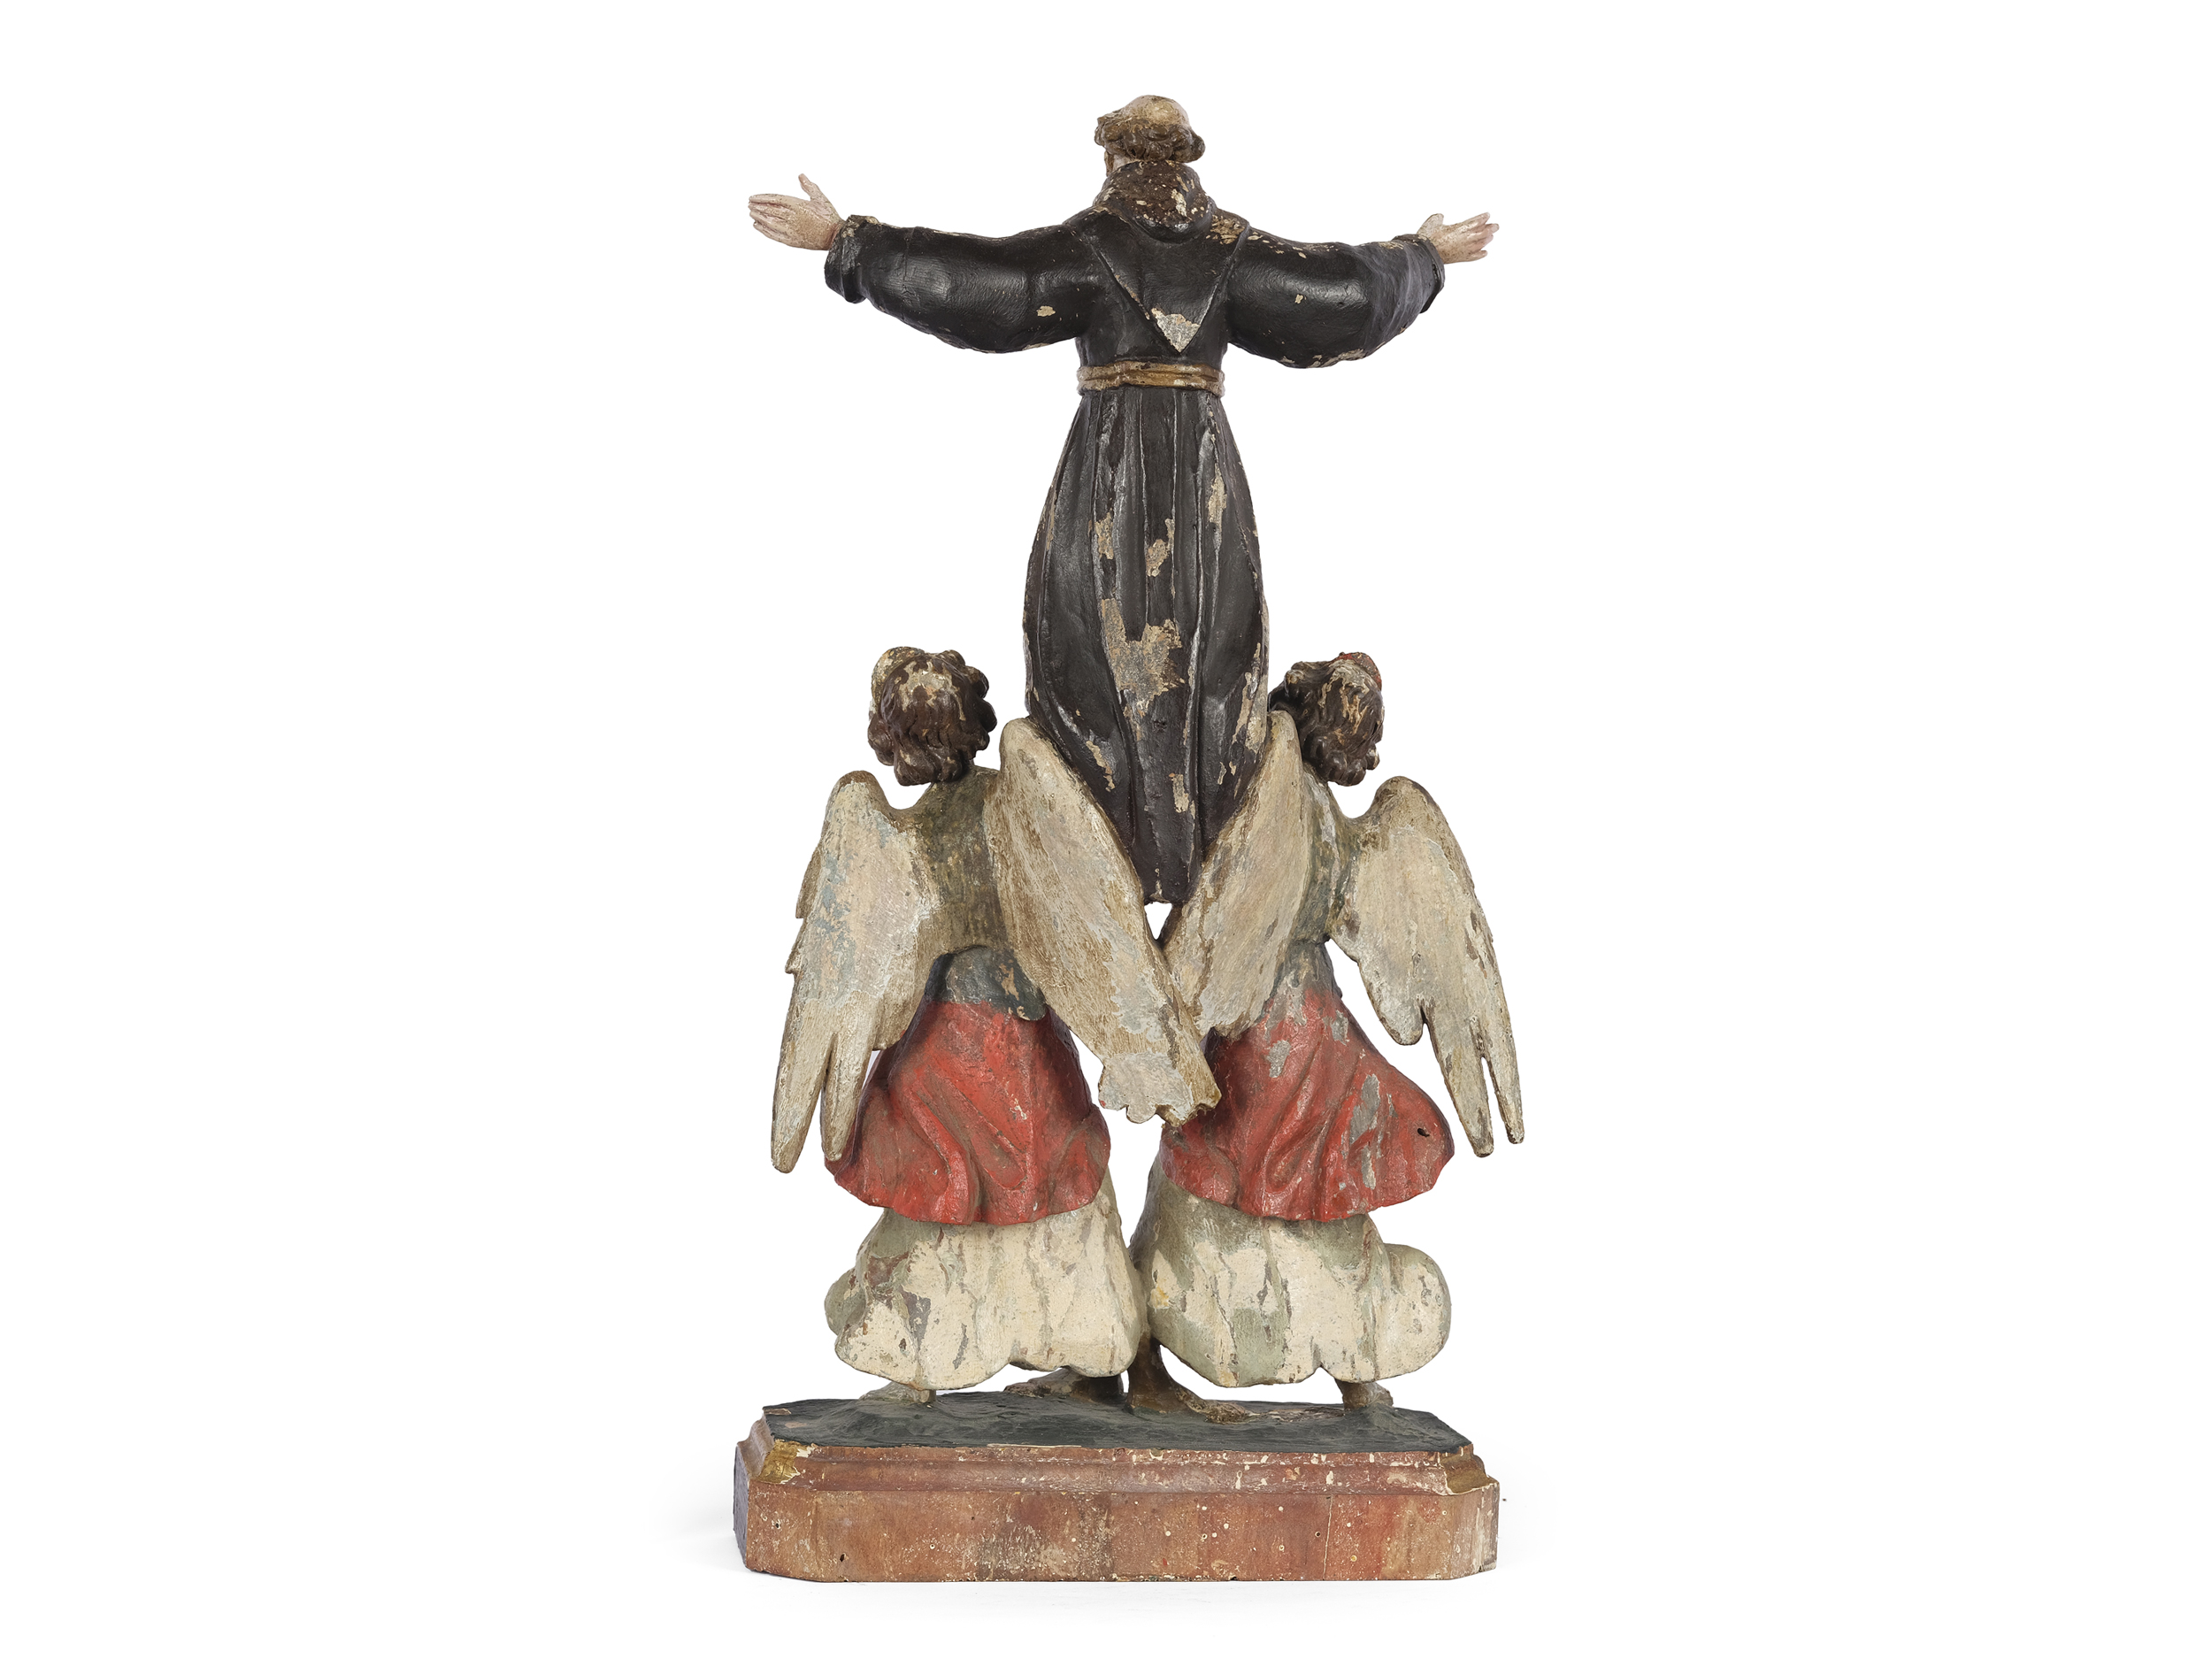 Saint Francis of Assisi with two angels, 17th century, Upper Italy/South Tyrol - Image 4 of 5